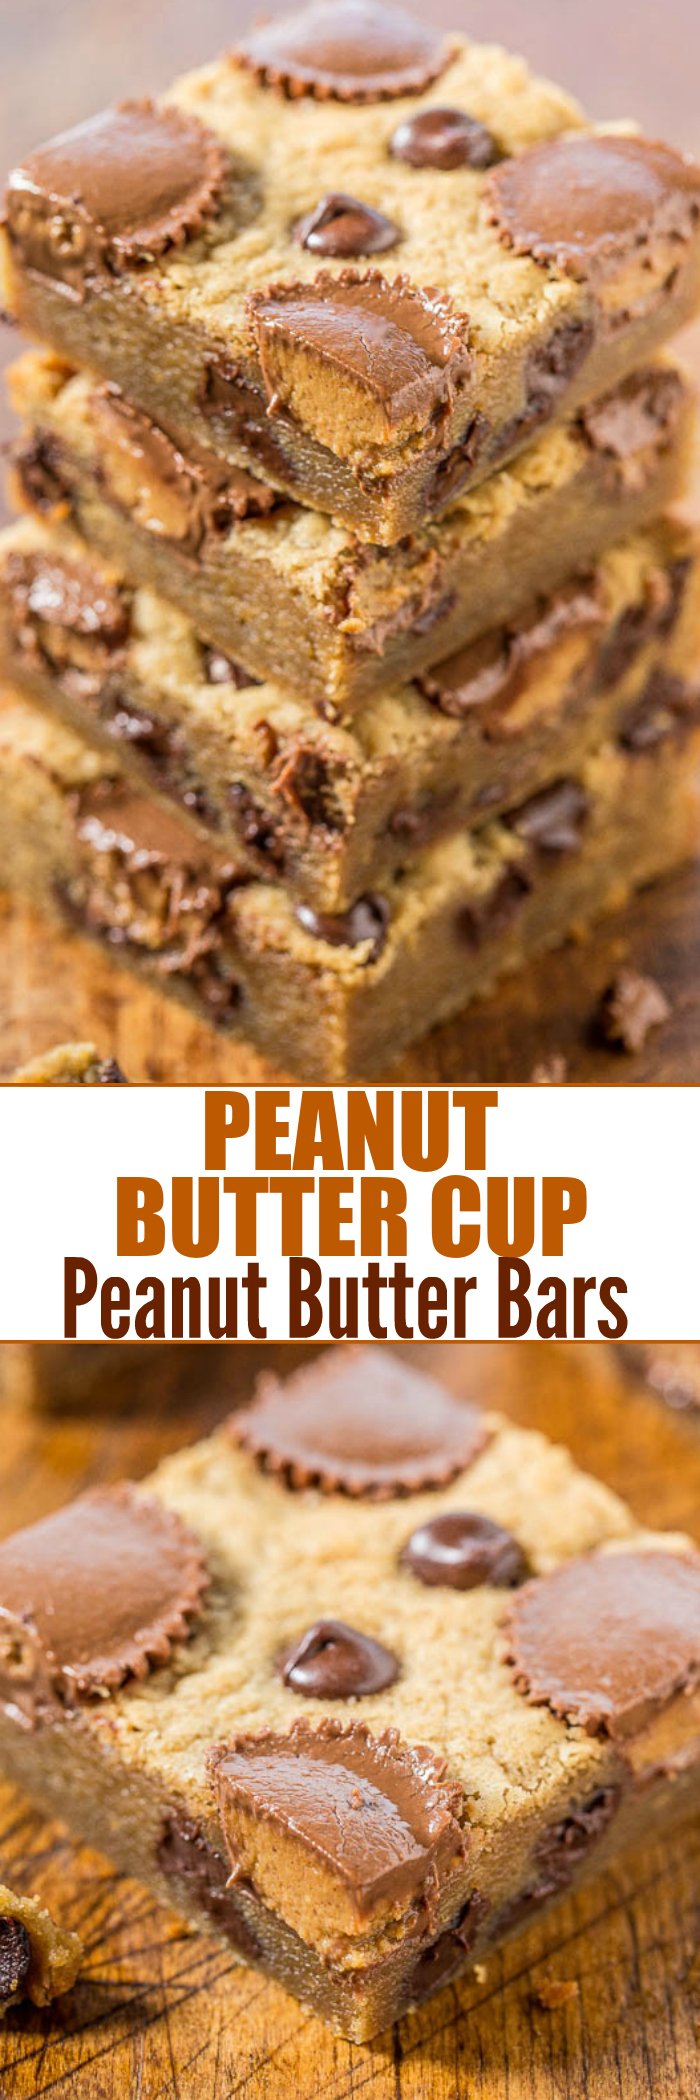 Reese's Peanut Butter Bars — Loaded with peanut butter, peanut butter cups and chocolate!! Soft, gooey and totally irresistible! Everything's better with peanut butter cups!!